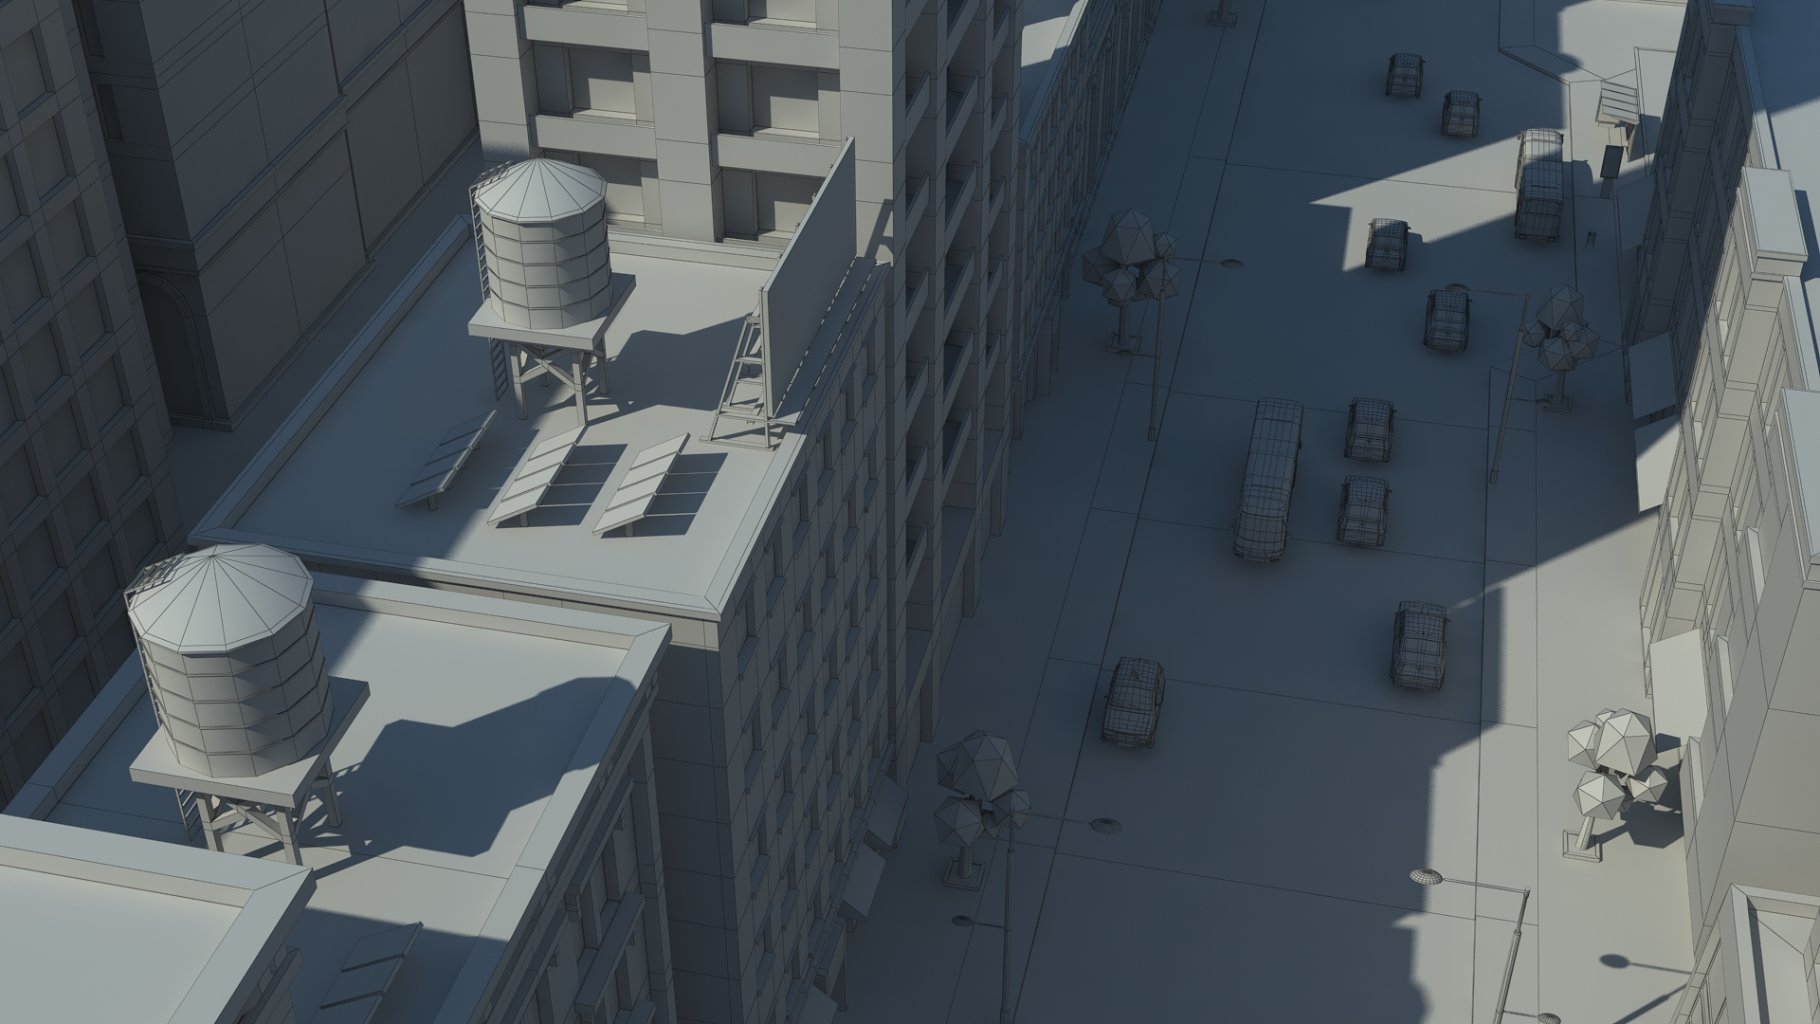 Rendering an irresistible low poly 3d city model without textures